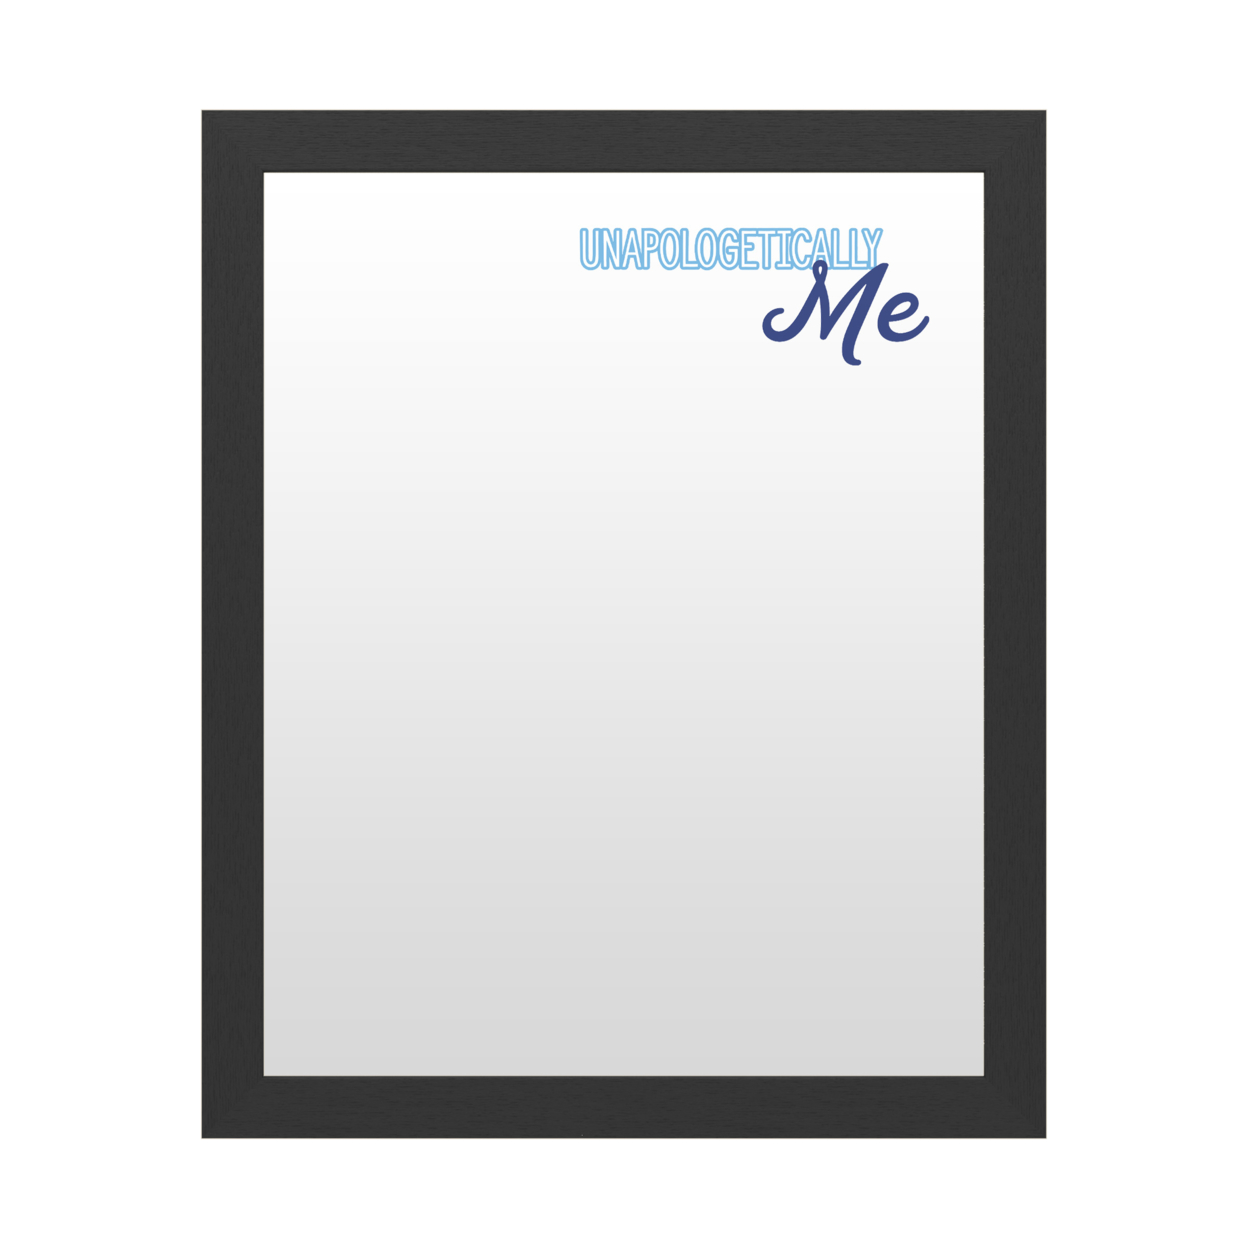 Dry Erase 16 X 20 Marker Board With Printed Artwork - Unapologetically Me 2 White Board - Ready To Hang